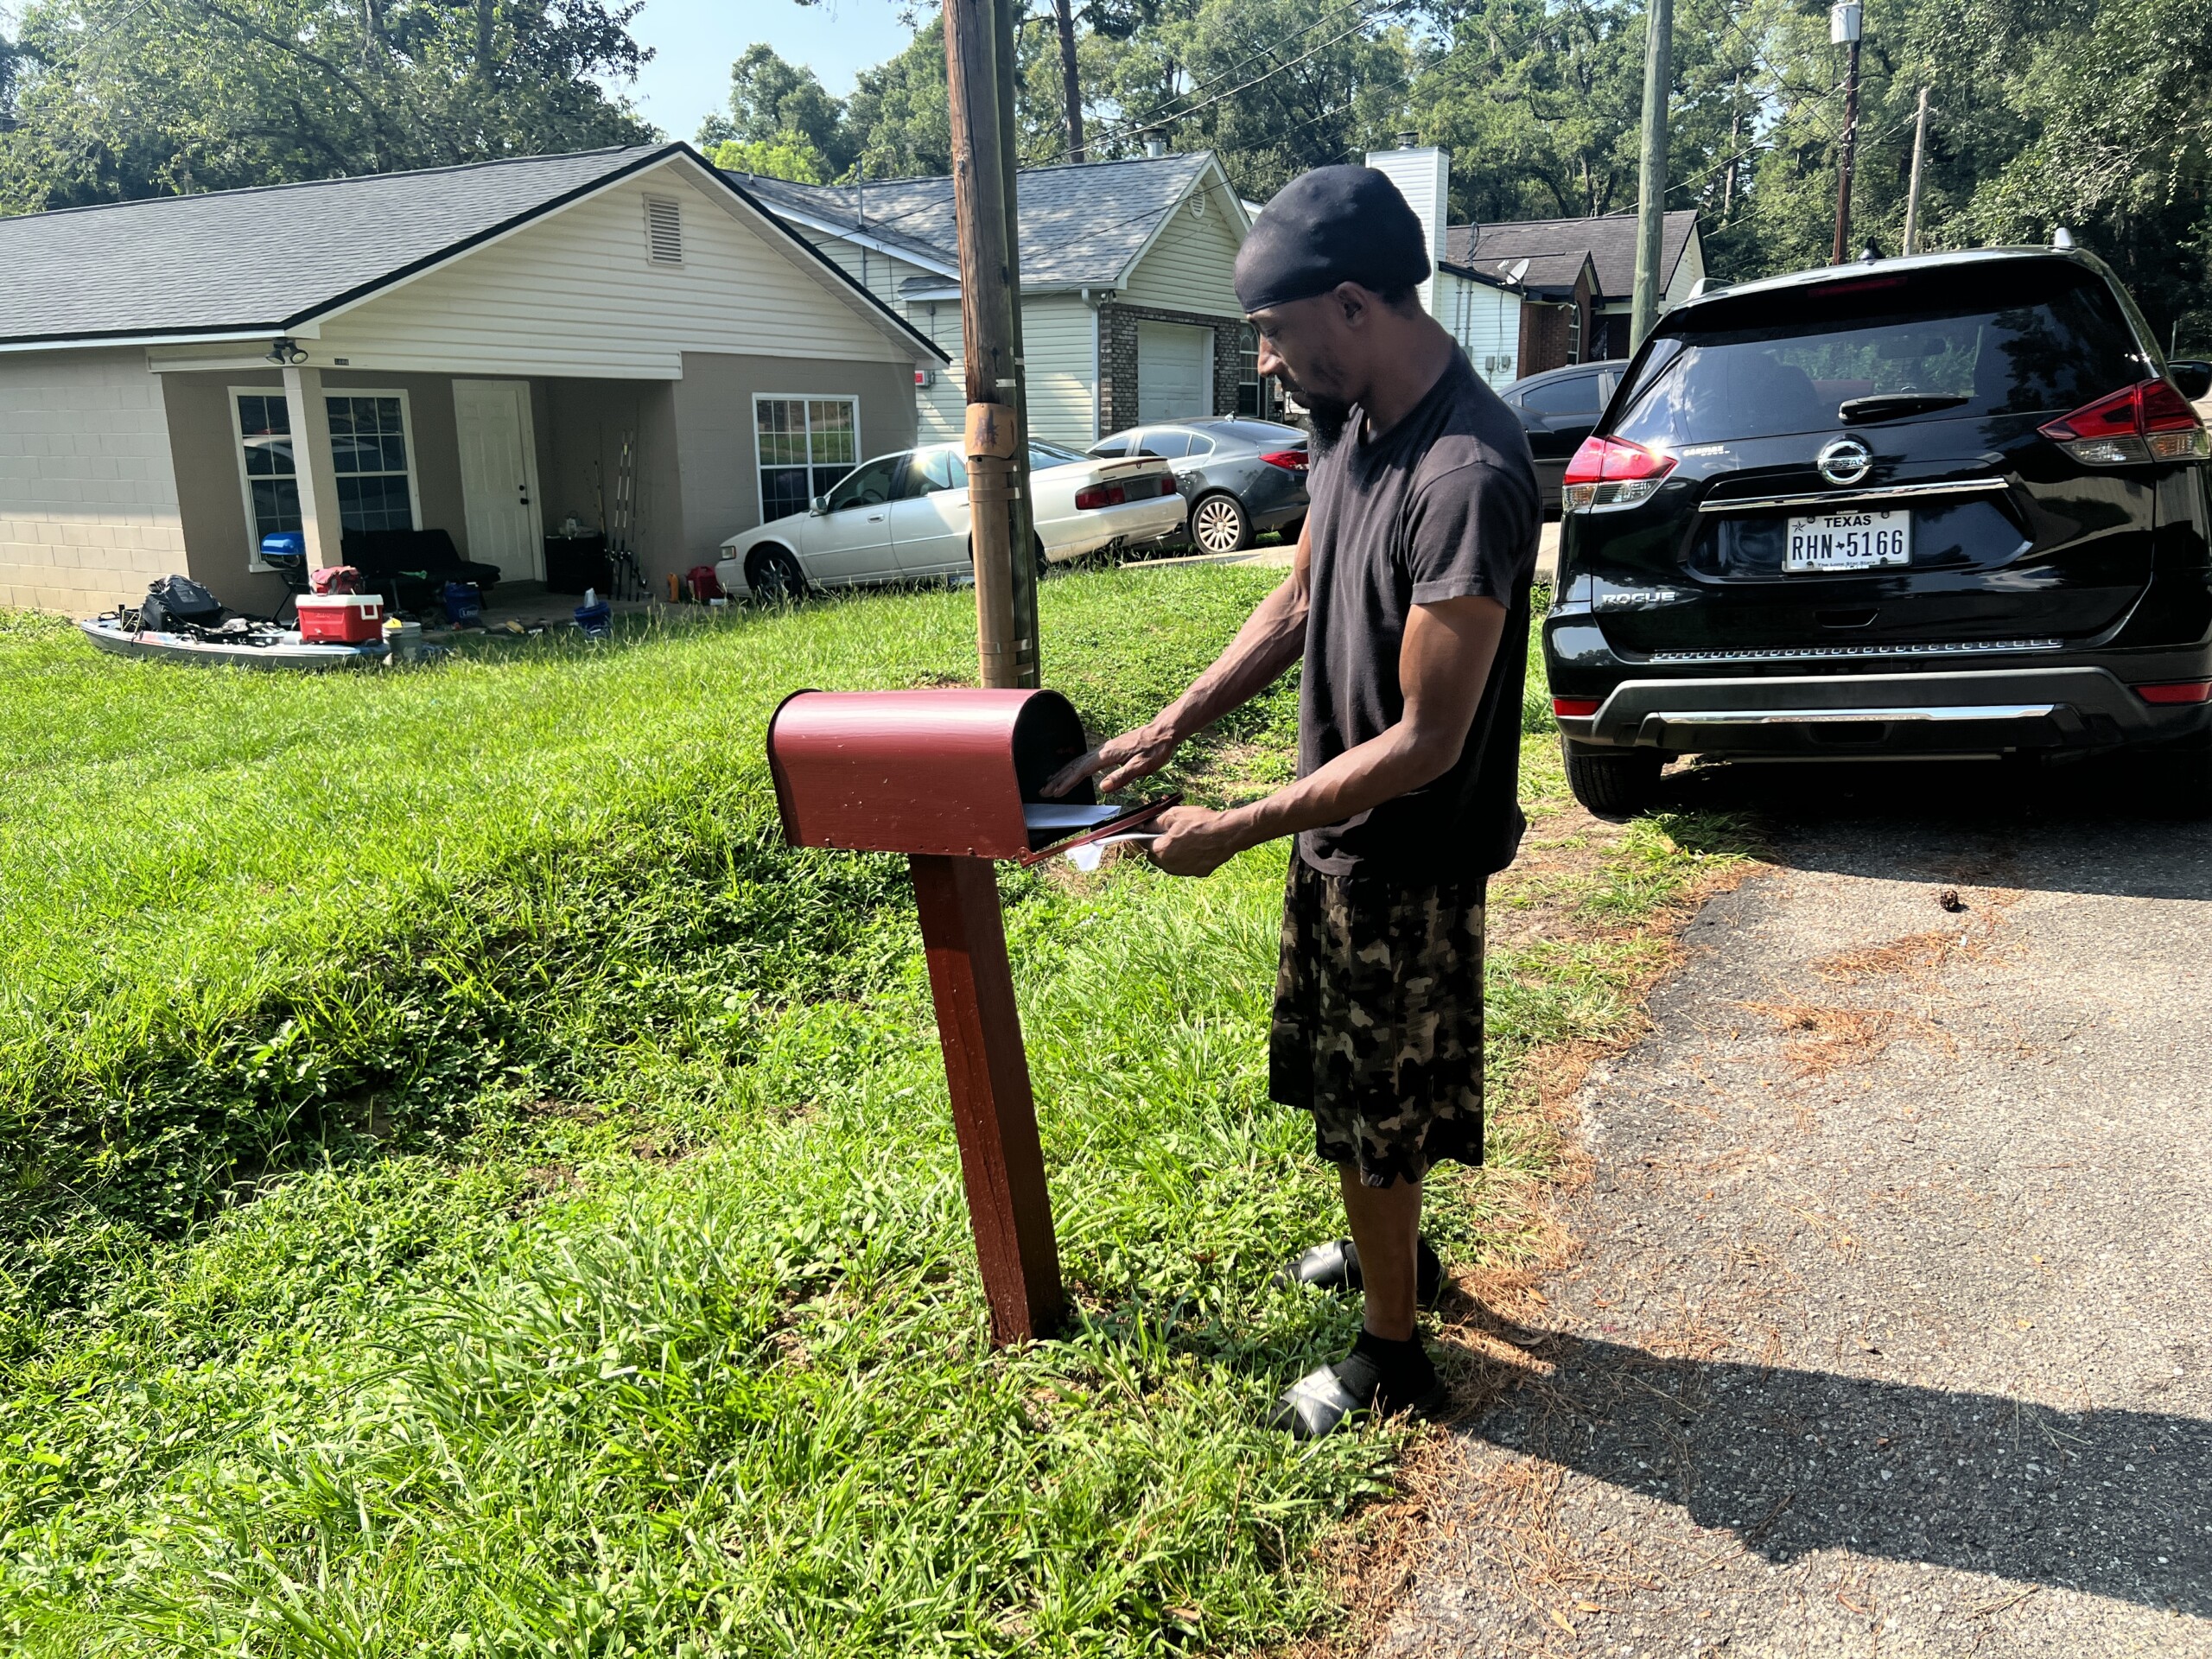 Tallahassee resident Julian Boise puts a completed voter registration form in his mailbox after volunteers with the Big Bend Voting Rights Project visited his home on the city's South Side on August, 19, 2023. | Valerie Crowder